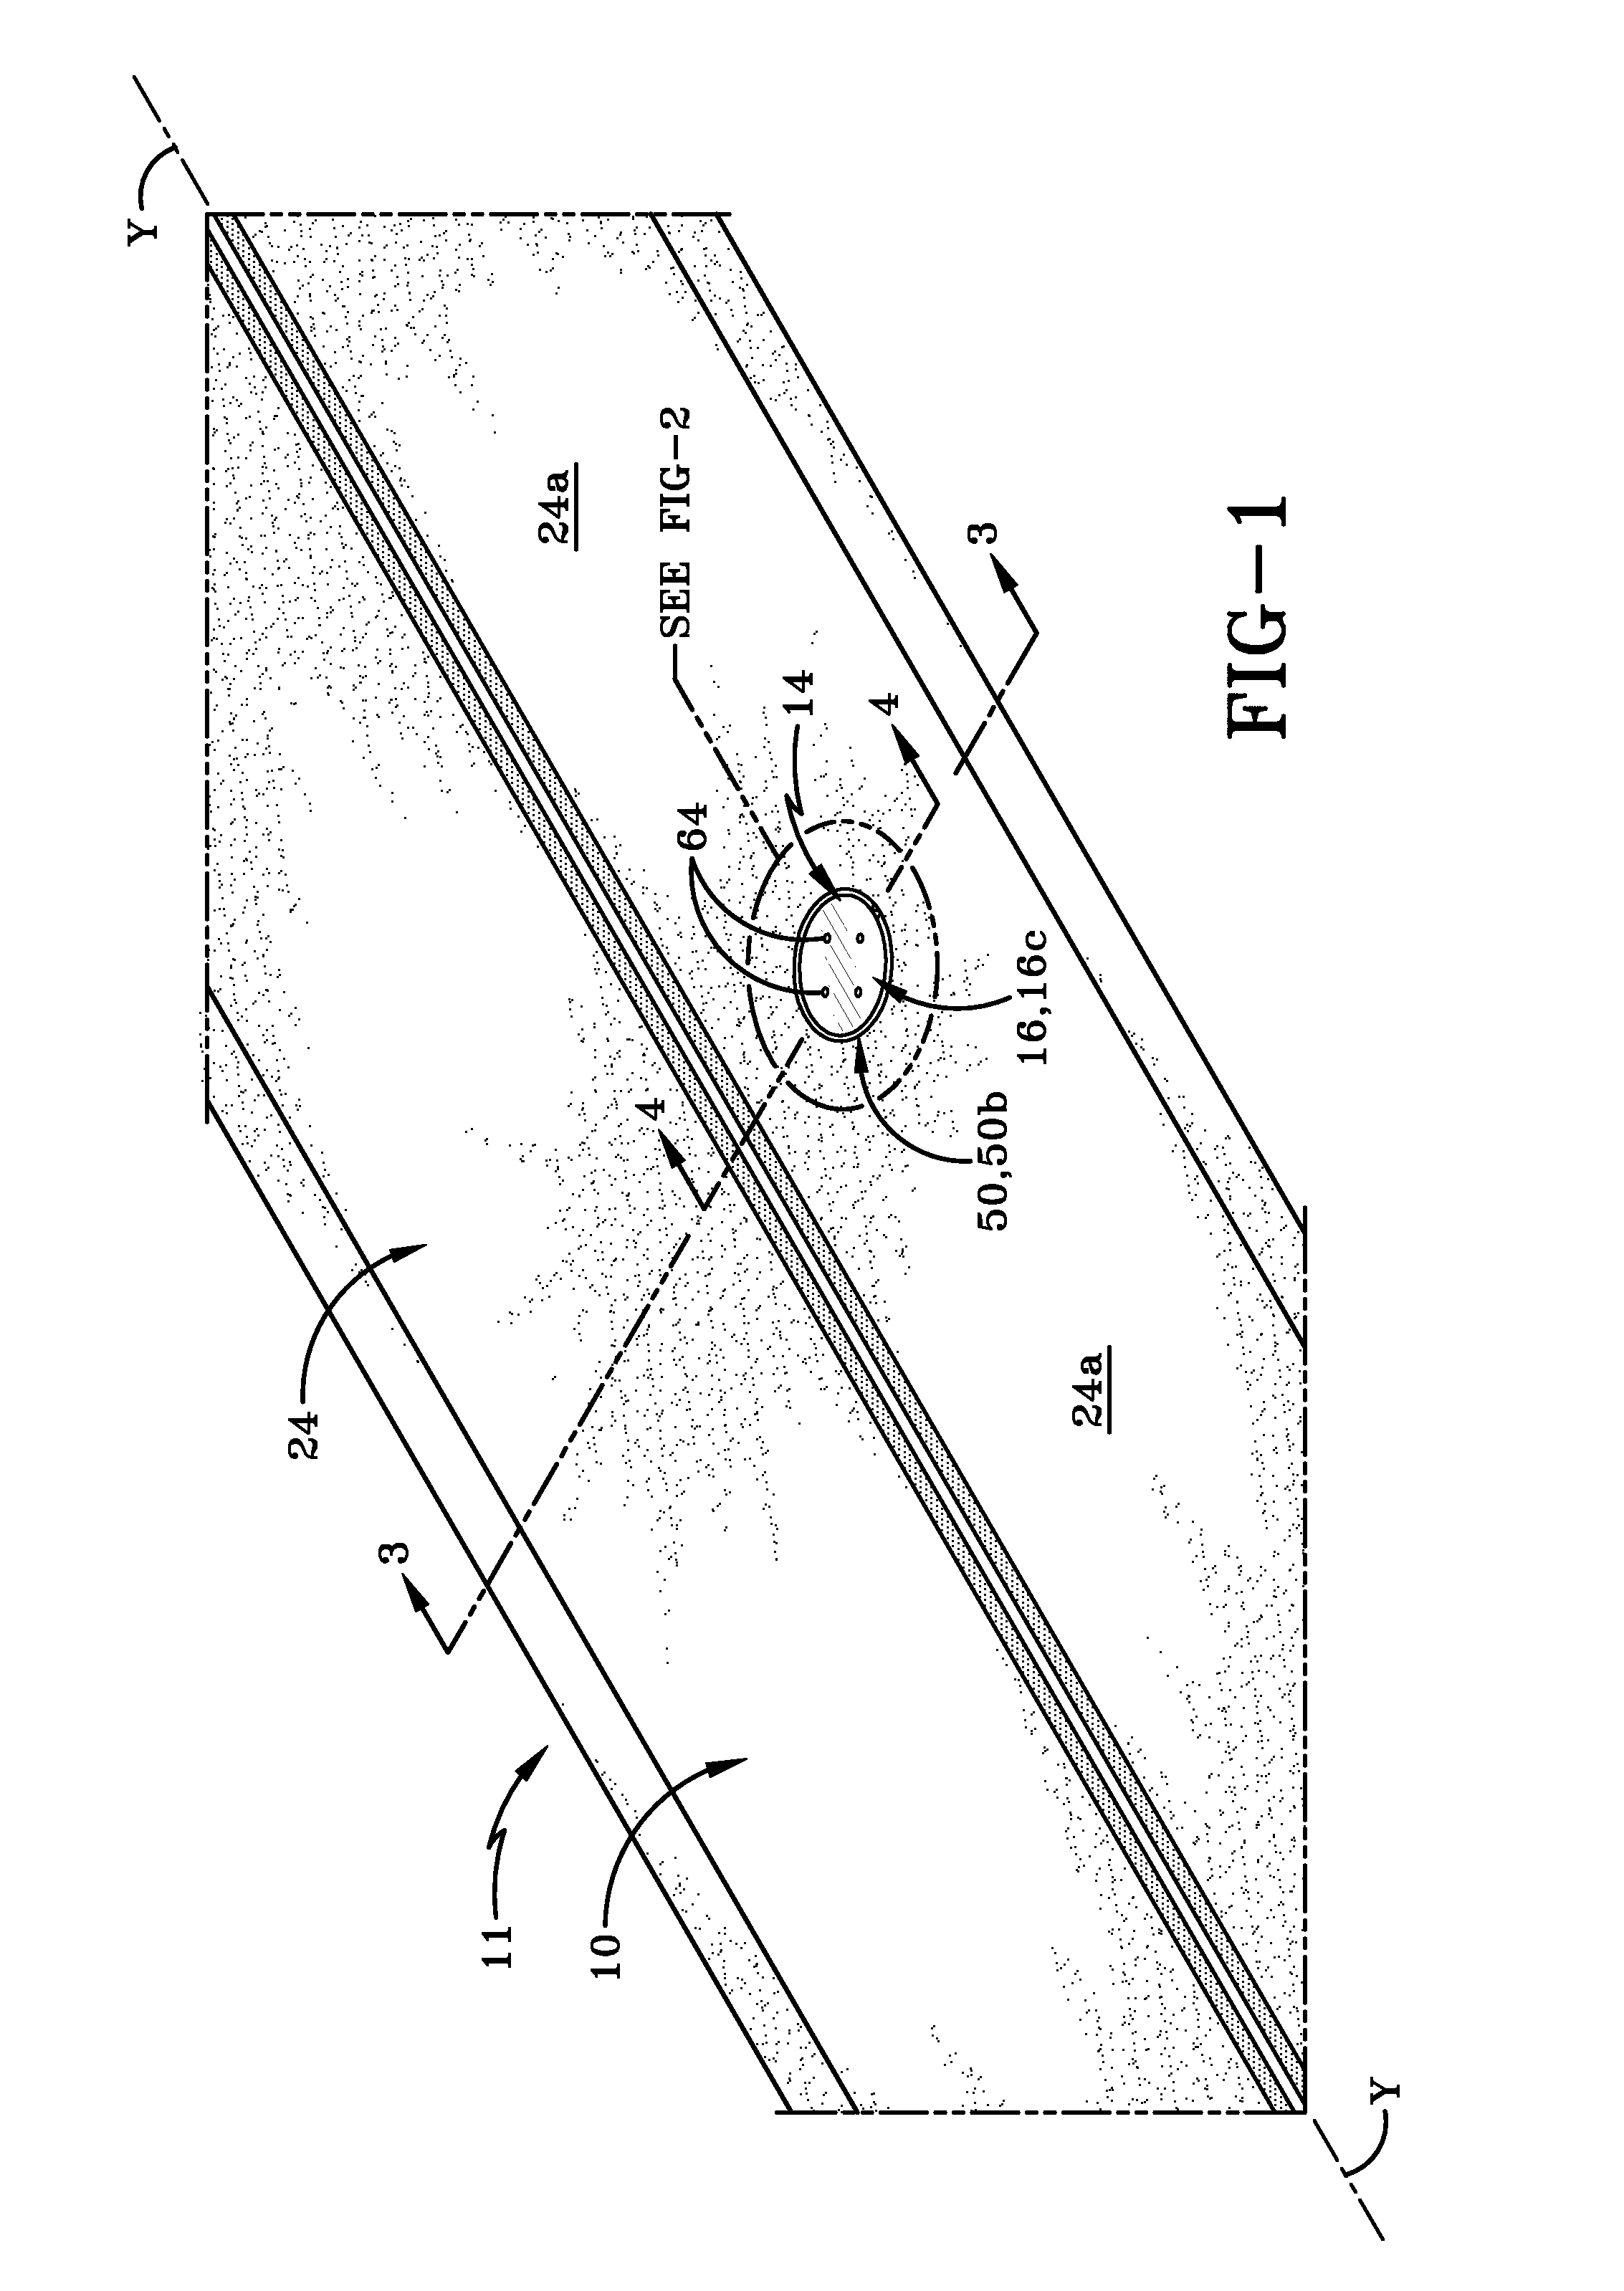 Inclined manhole cover riser assembly